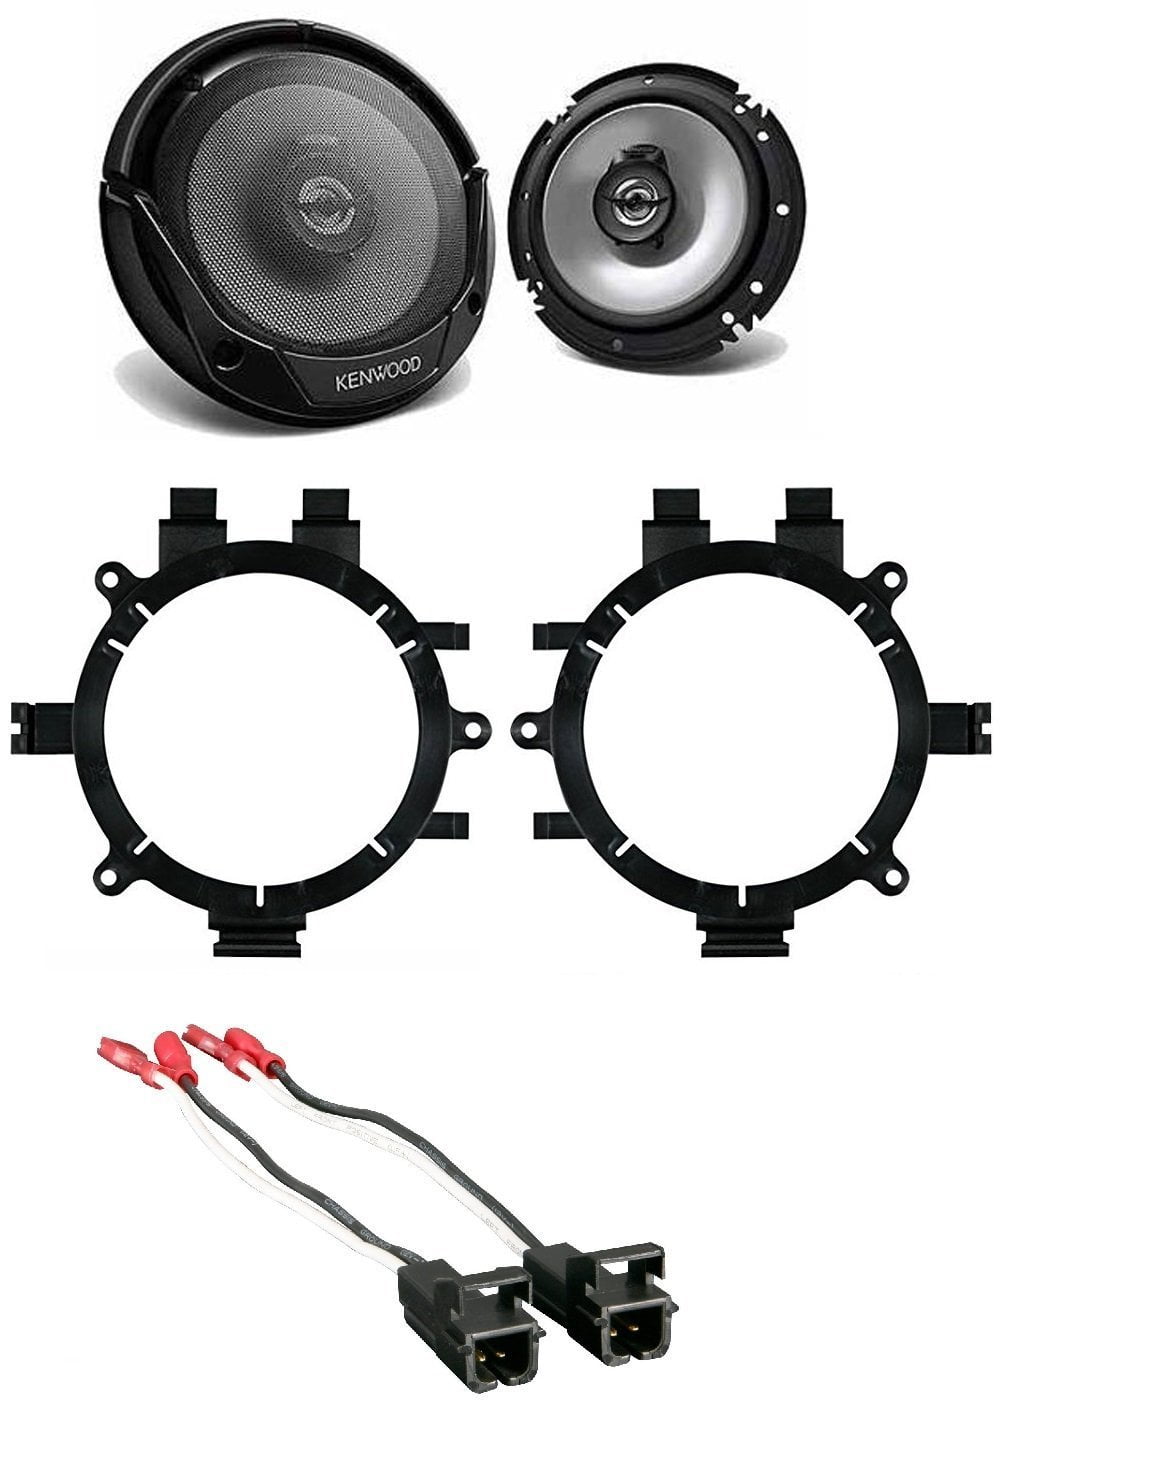 Harness For Ford Kenwood KFC-1665S 6.5 Speakers 1 Pair Front Rear Adapters